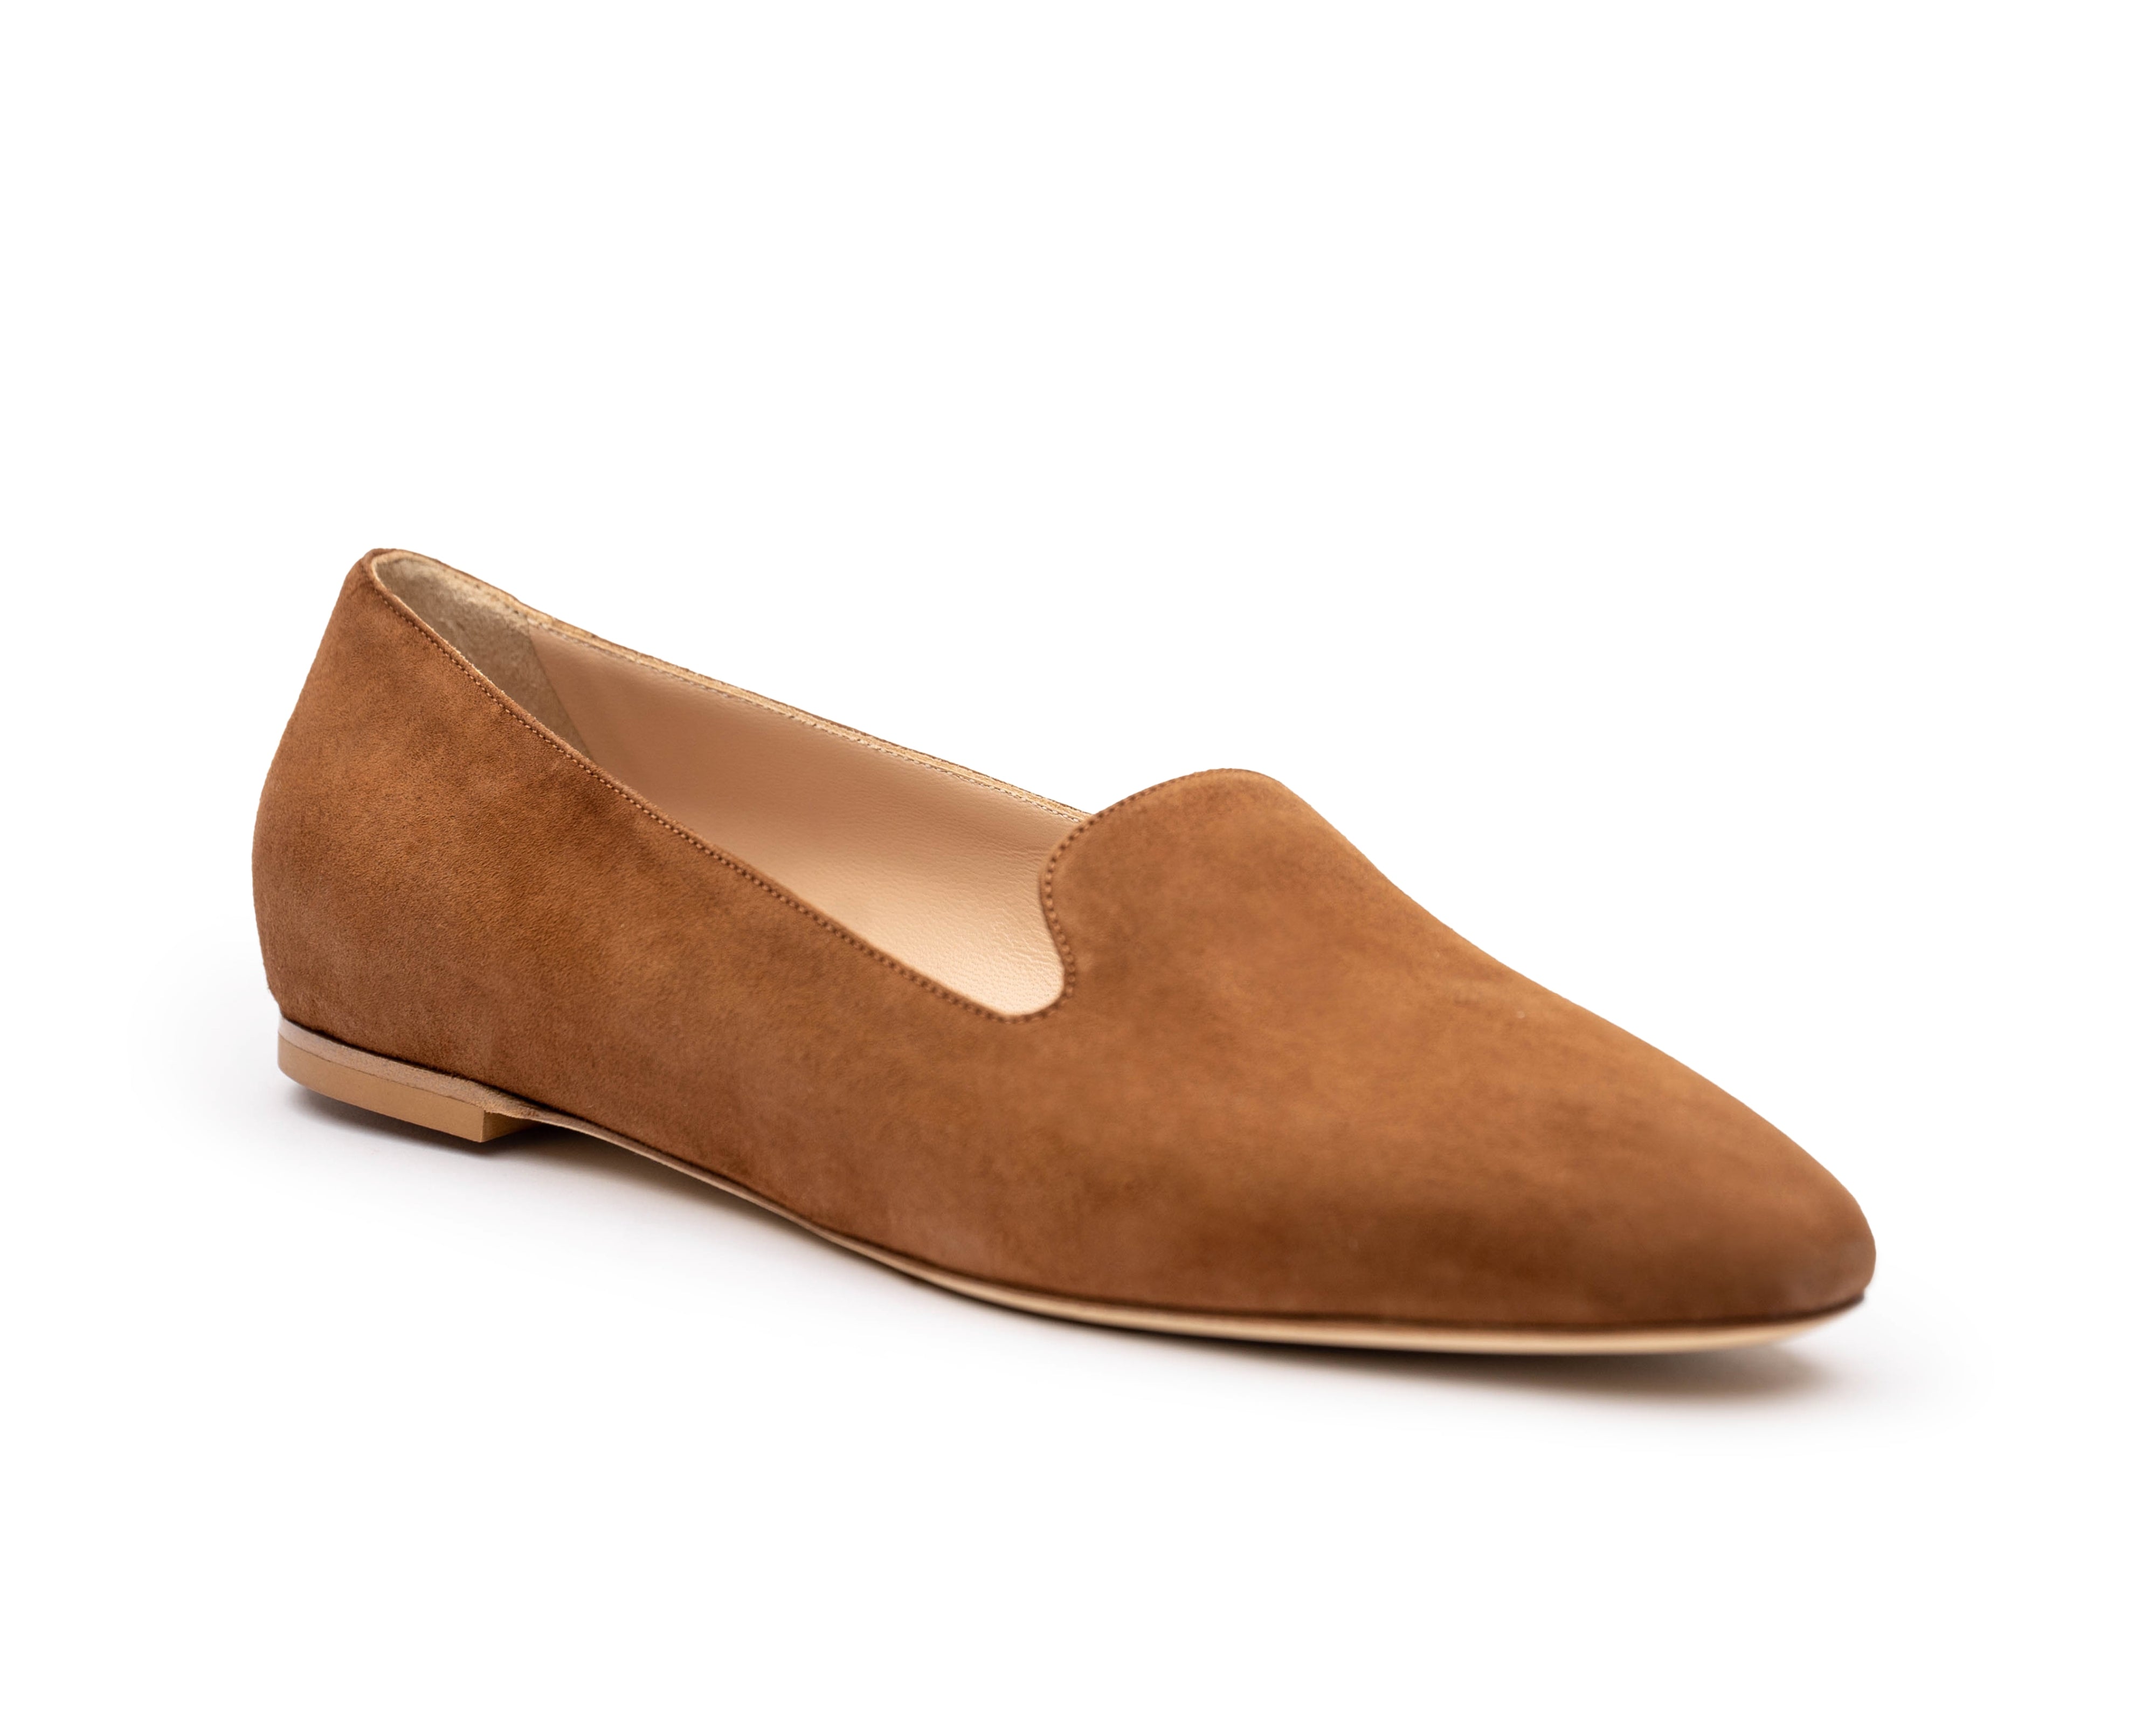 Tan Brown Loafers. Women's nude loafers. Comfortable loafers. Office Professional loafer flats.